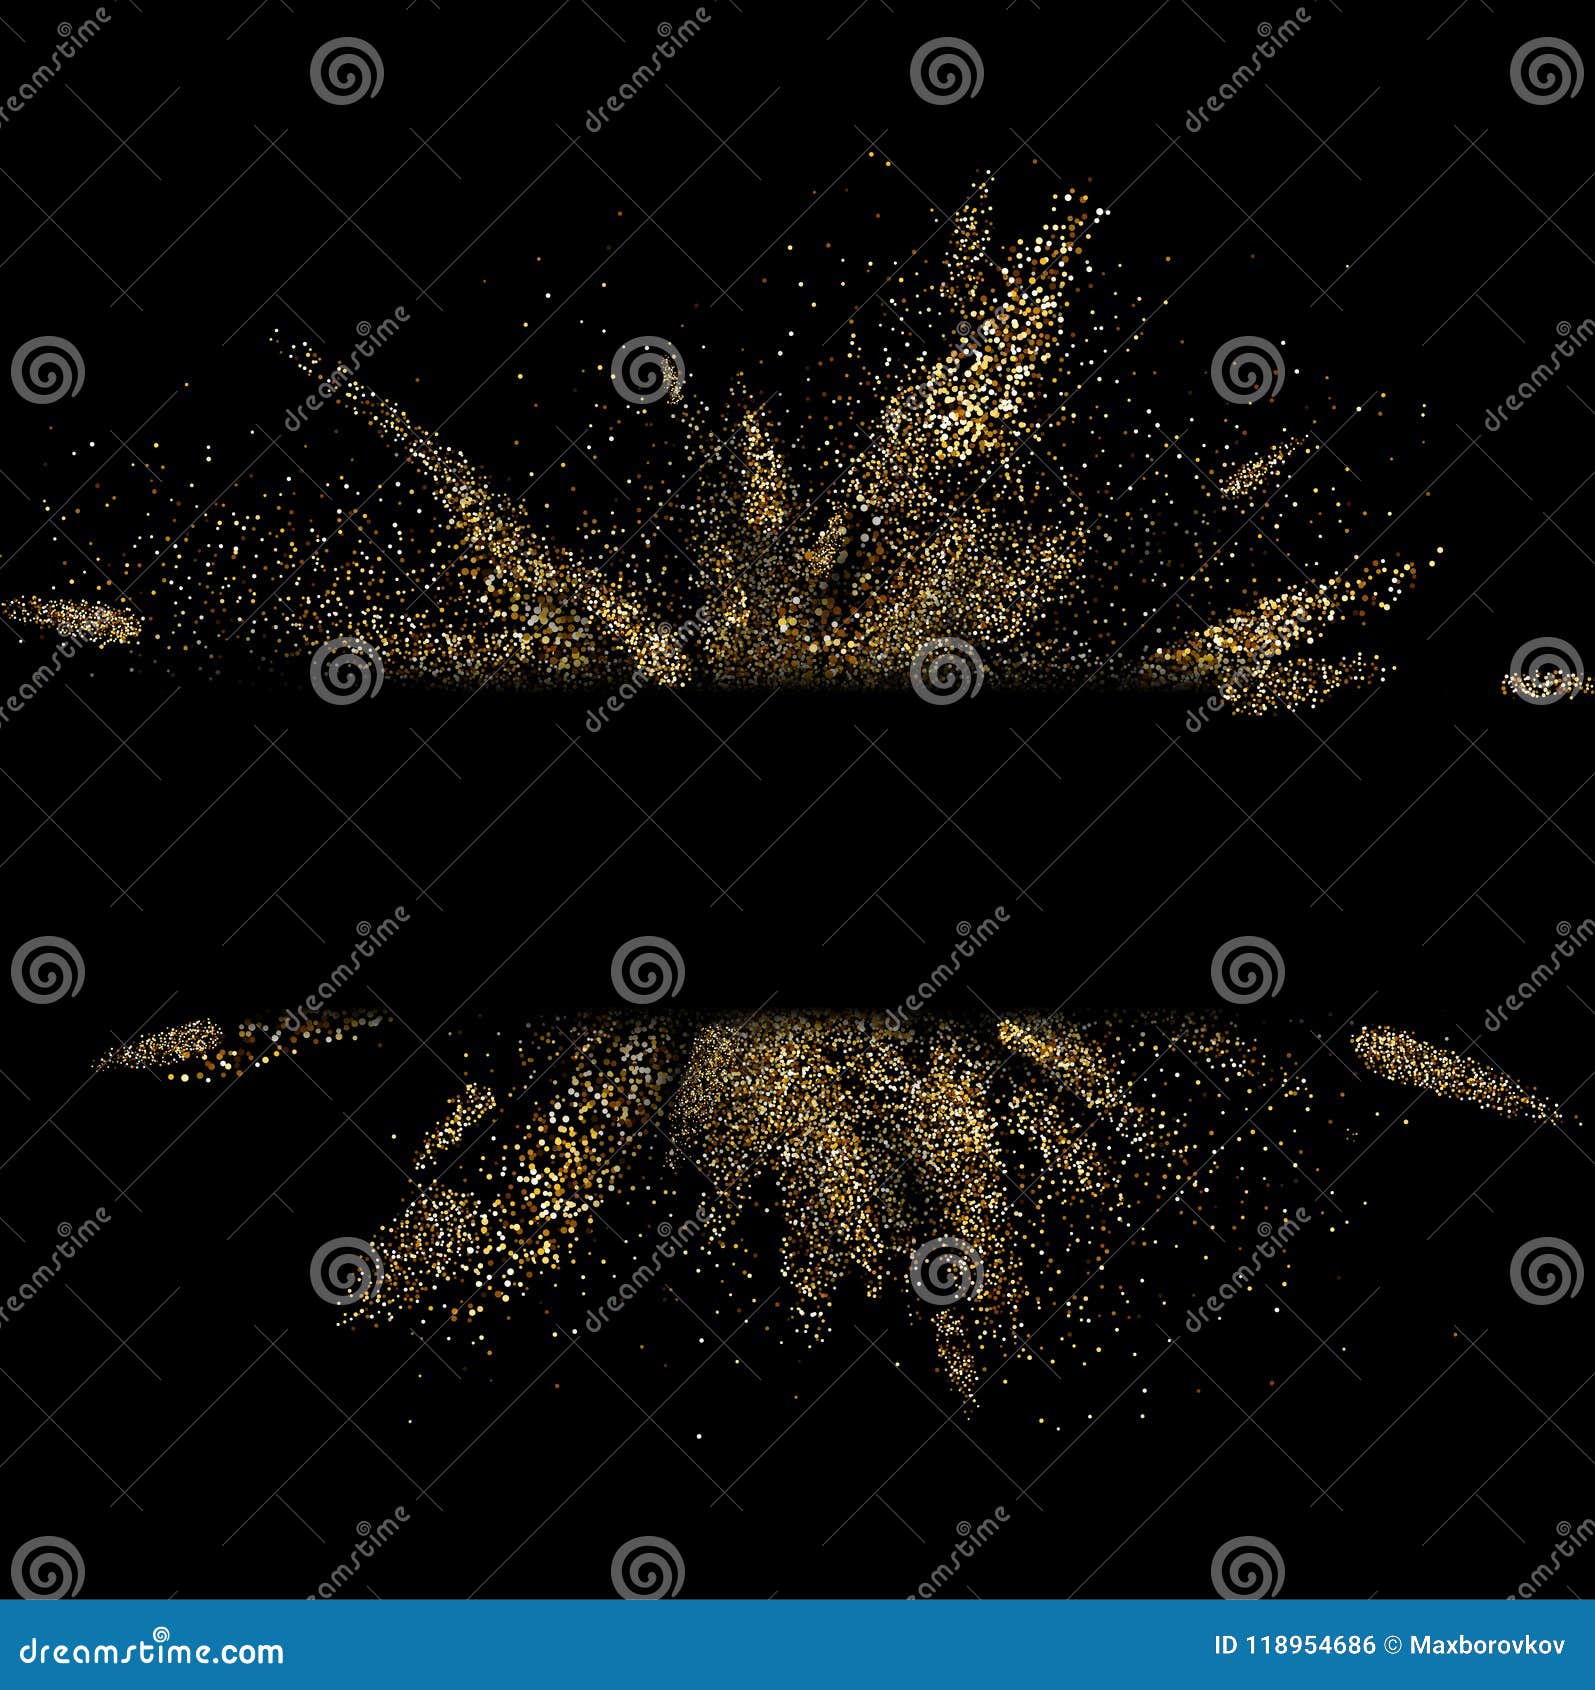 Black Background with Golden Glitter Explosion. Stock Vector ...